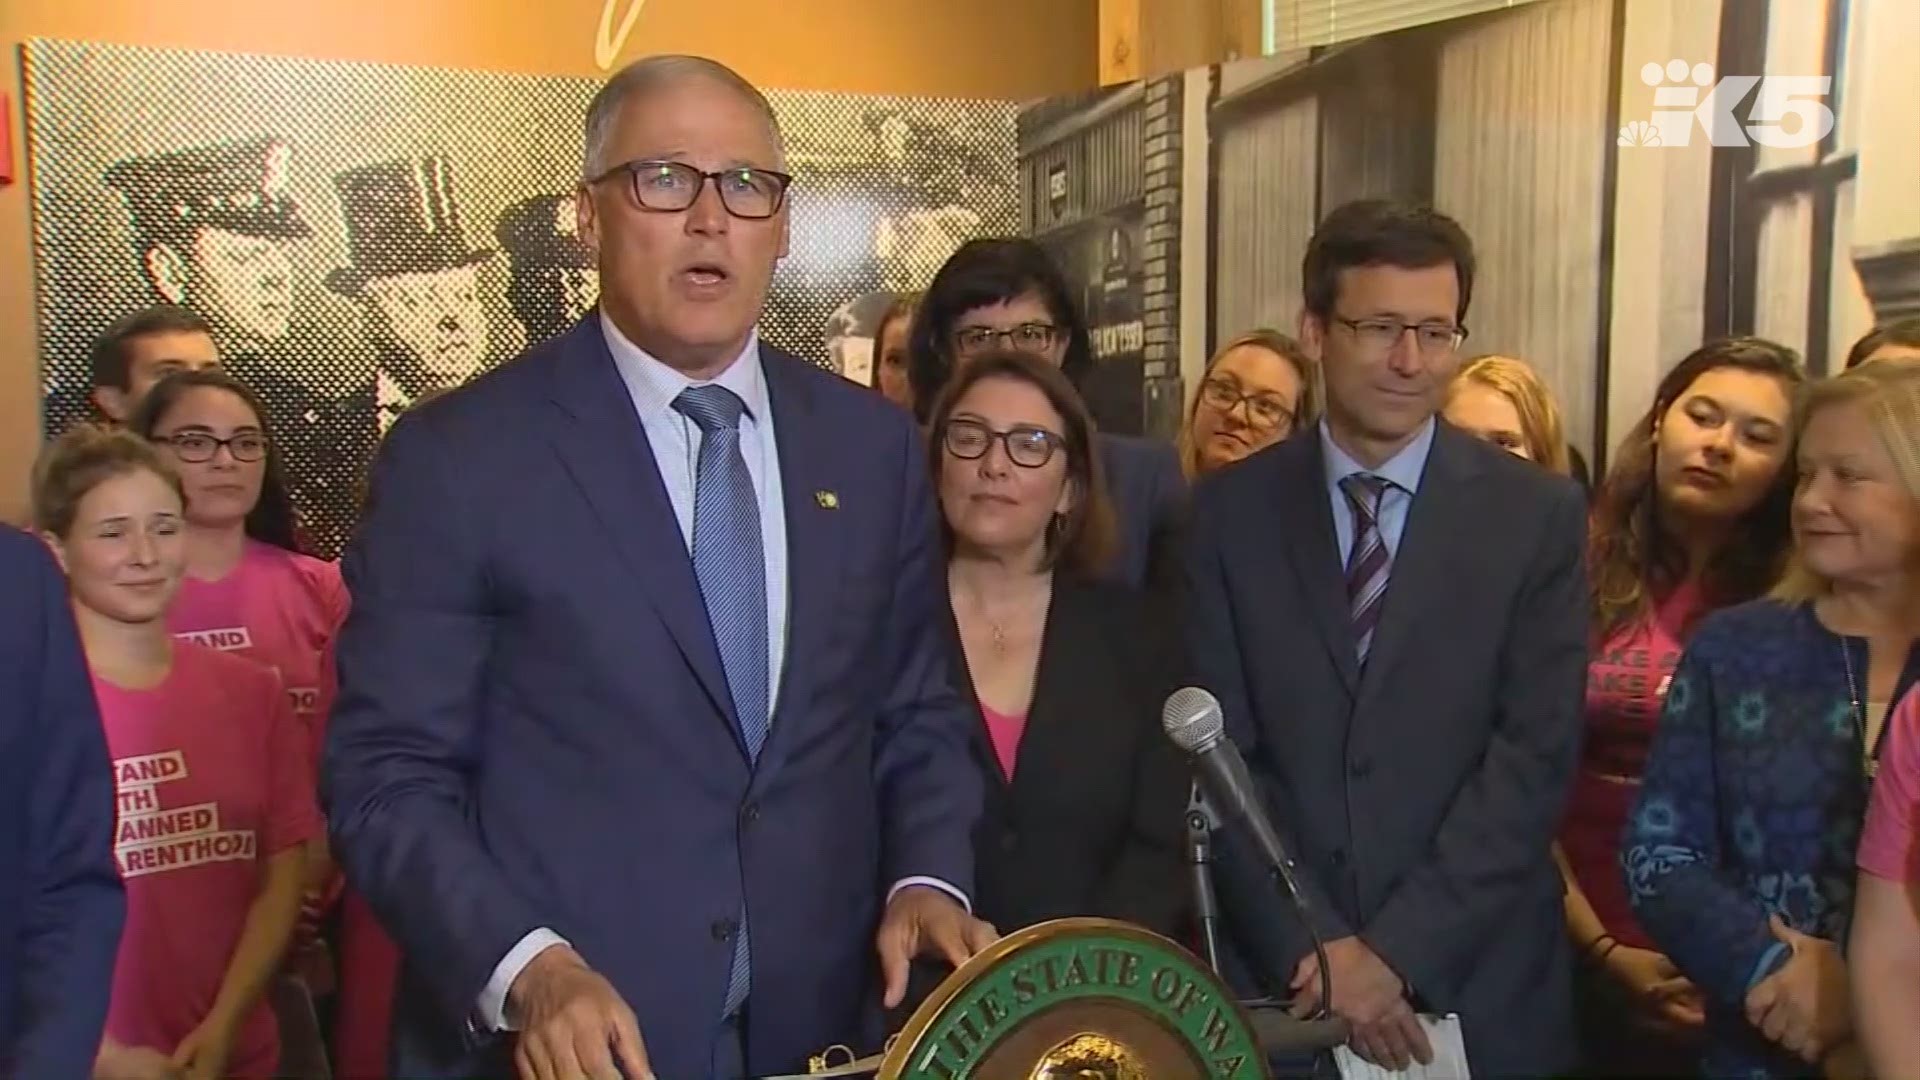 Governor Jay Inslee and state Attorney General Bob Ferguson discuss their battle to protect women's reproductive rights in Washington